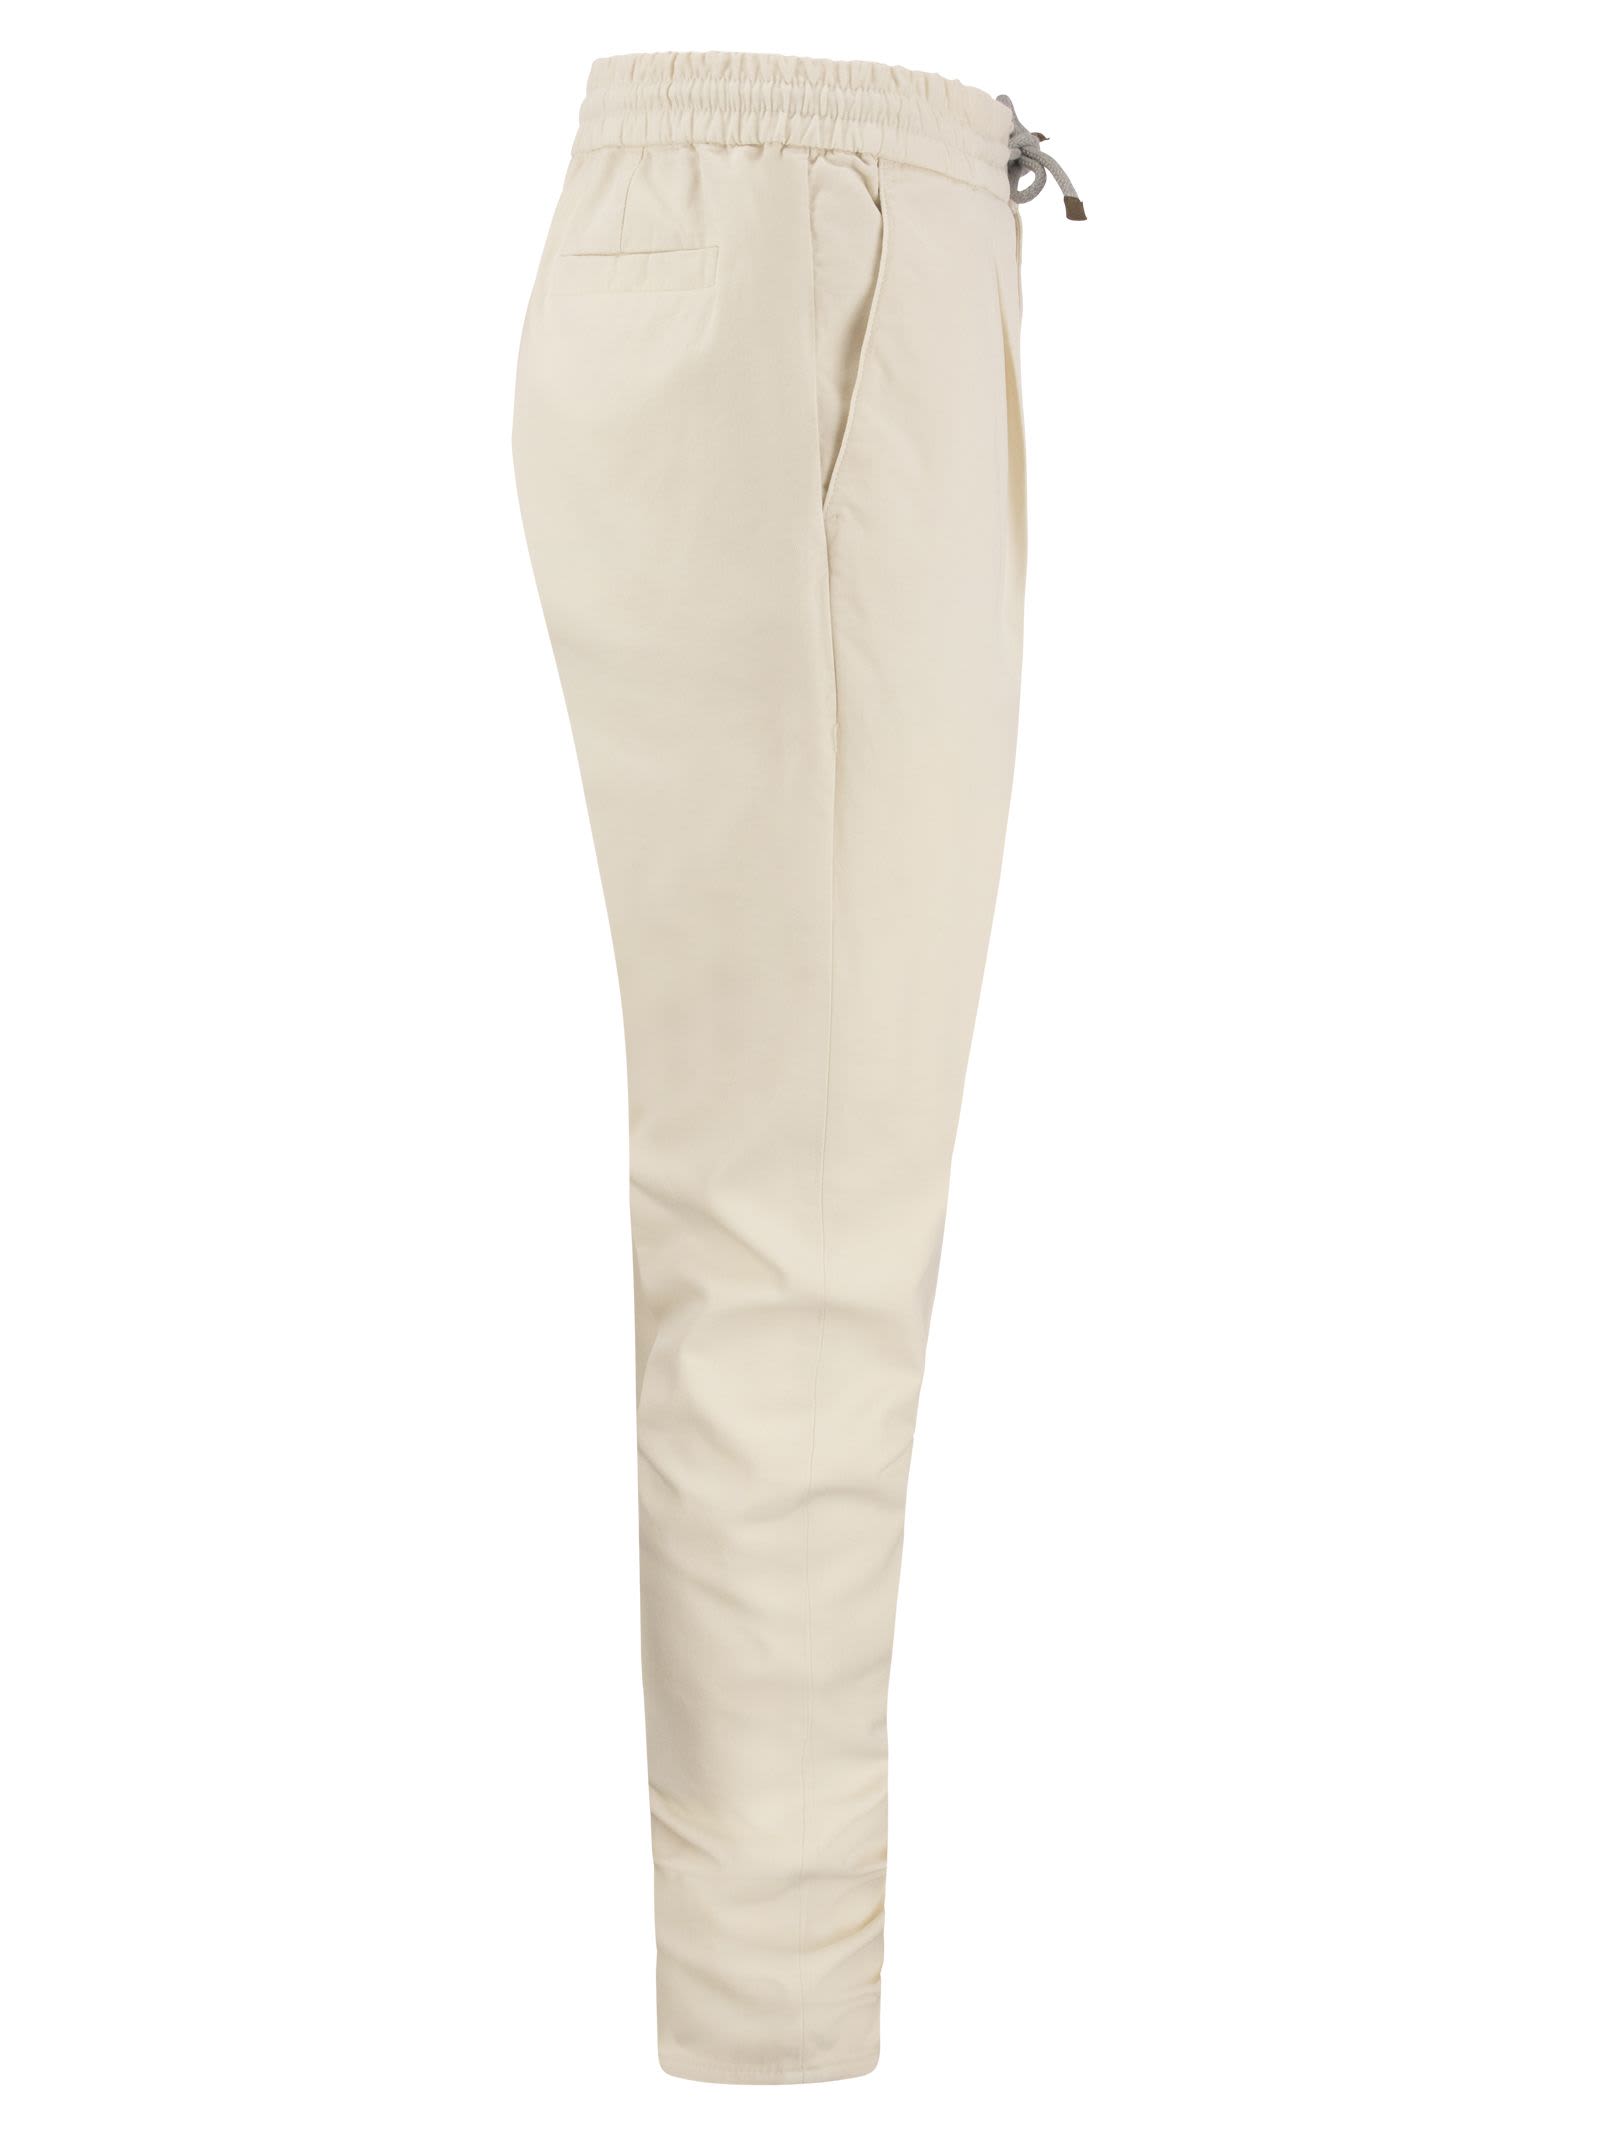 Leisure fit trousers with pleats